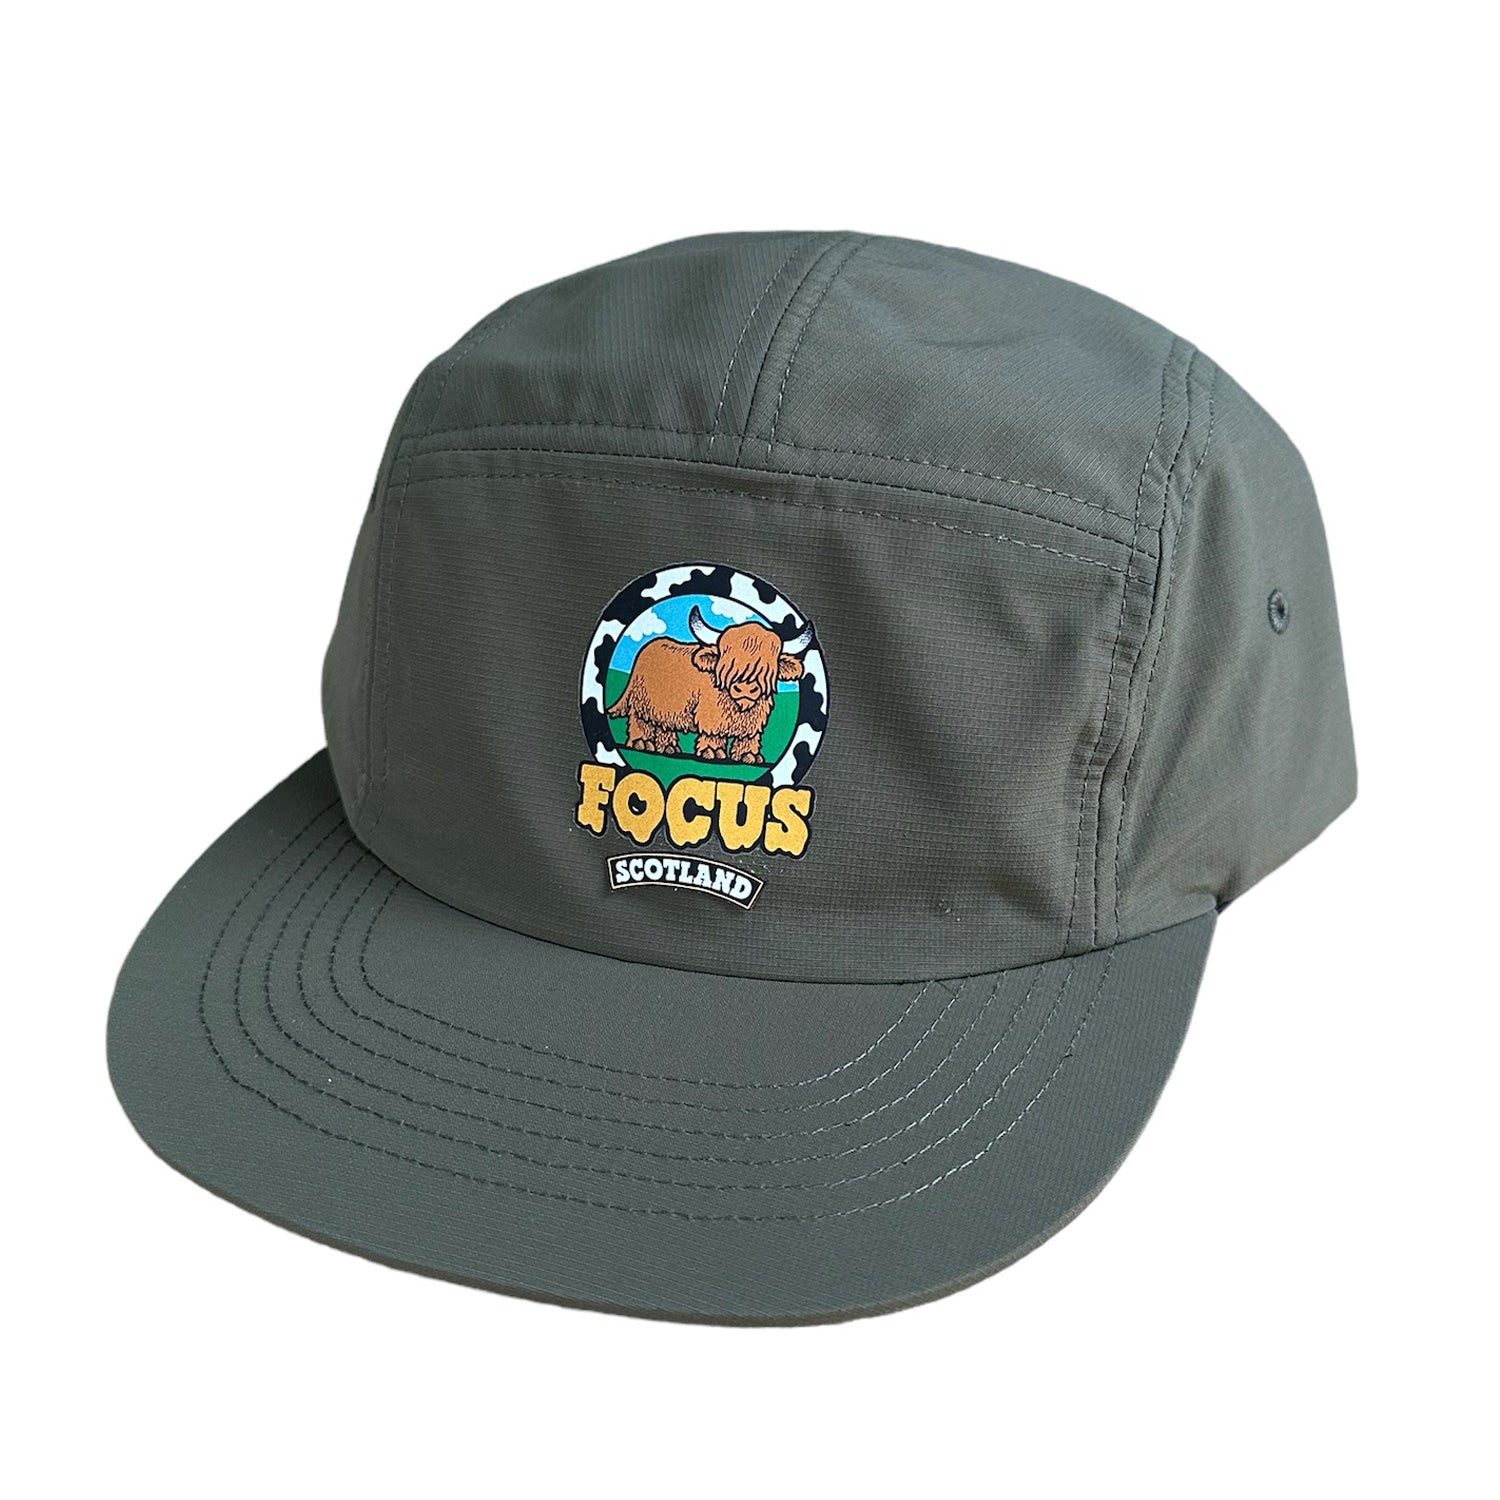 Focus Melted Coo Ripstop 5 Panel Cap - Olive Green